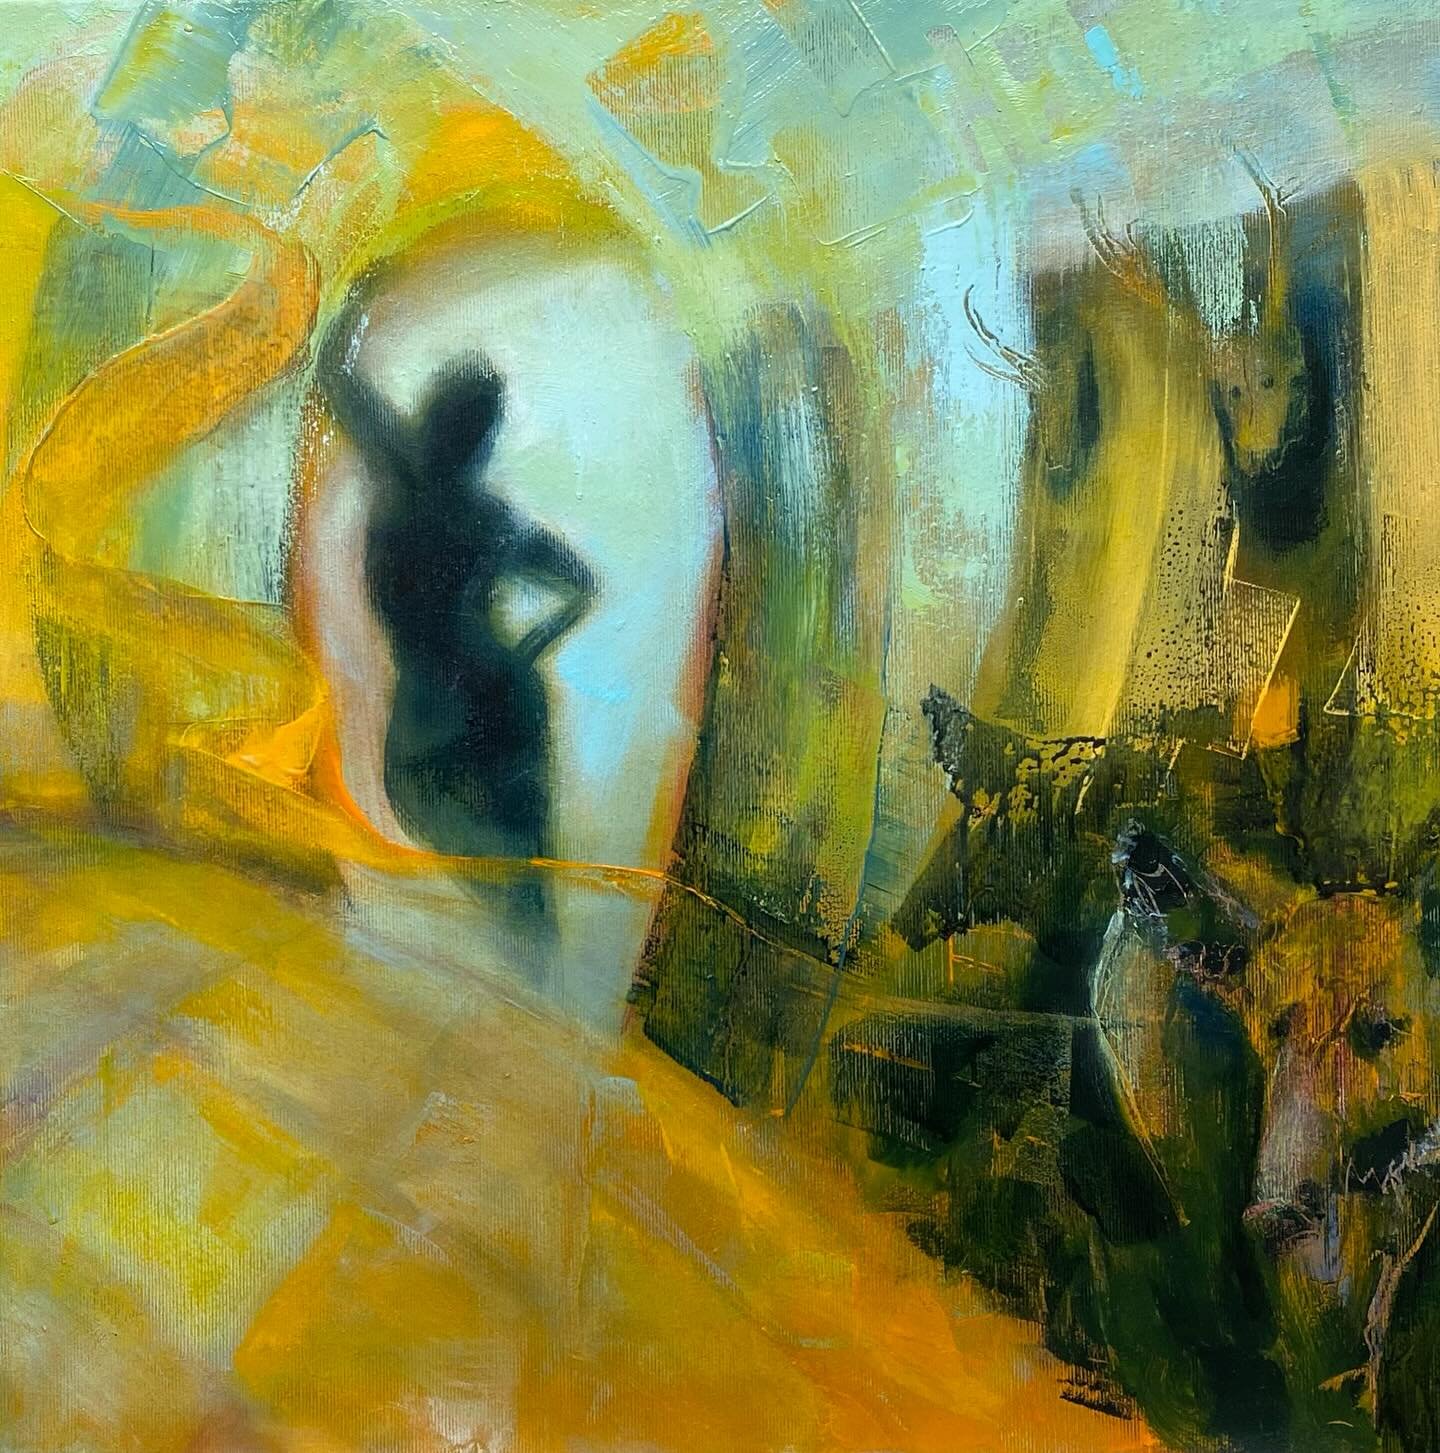 Wild, 50 x 50 cm, Oil, 2024

From my Gasthaus series. This painting is about shared spaces. Unexpected encounters. Open ends. Allowing yourself and others to go a little bit wild- without being offensive. And, of course, the people that bring those r